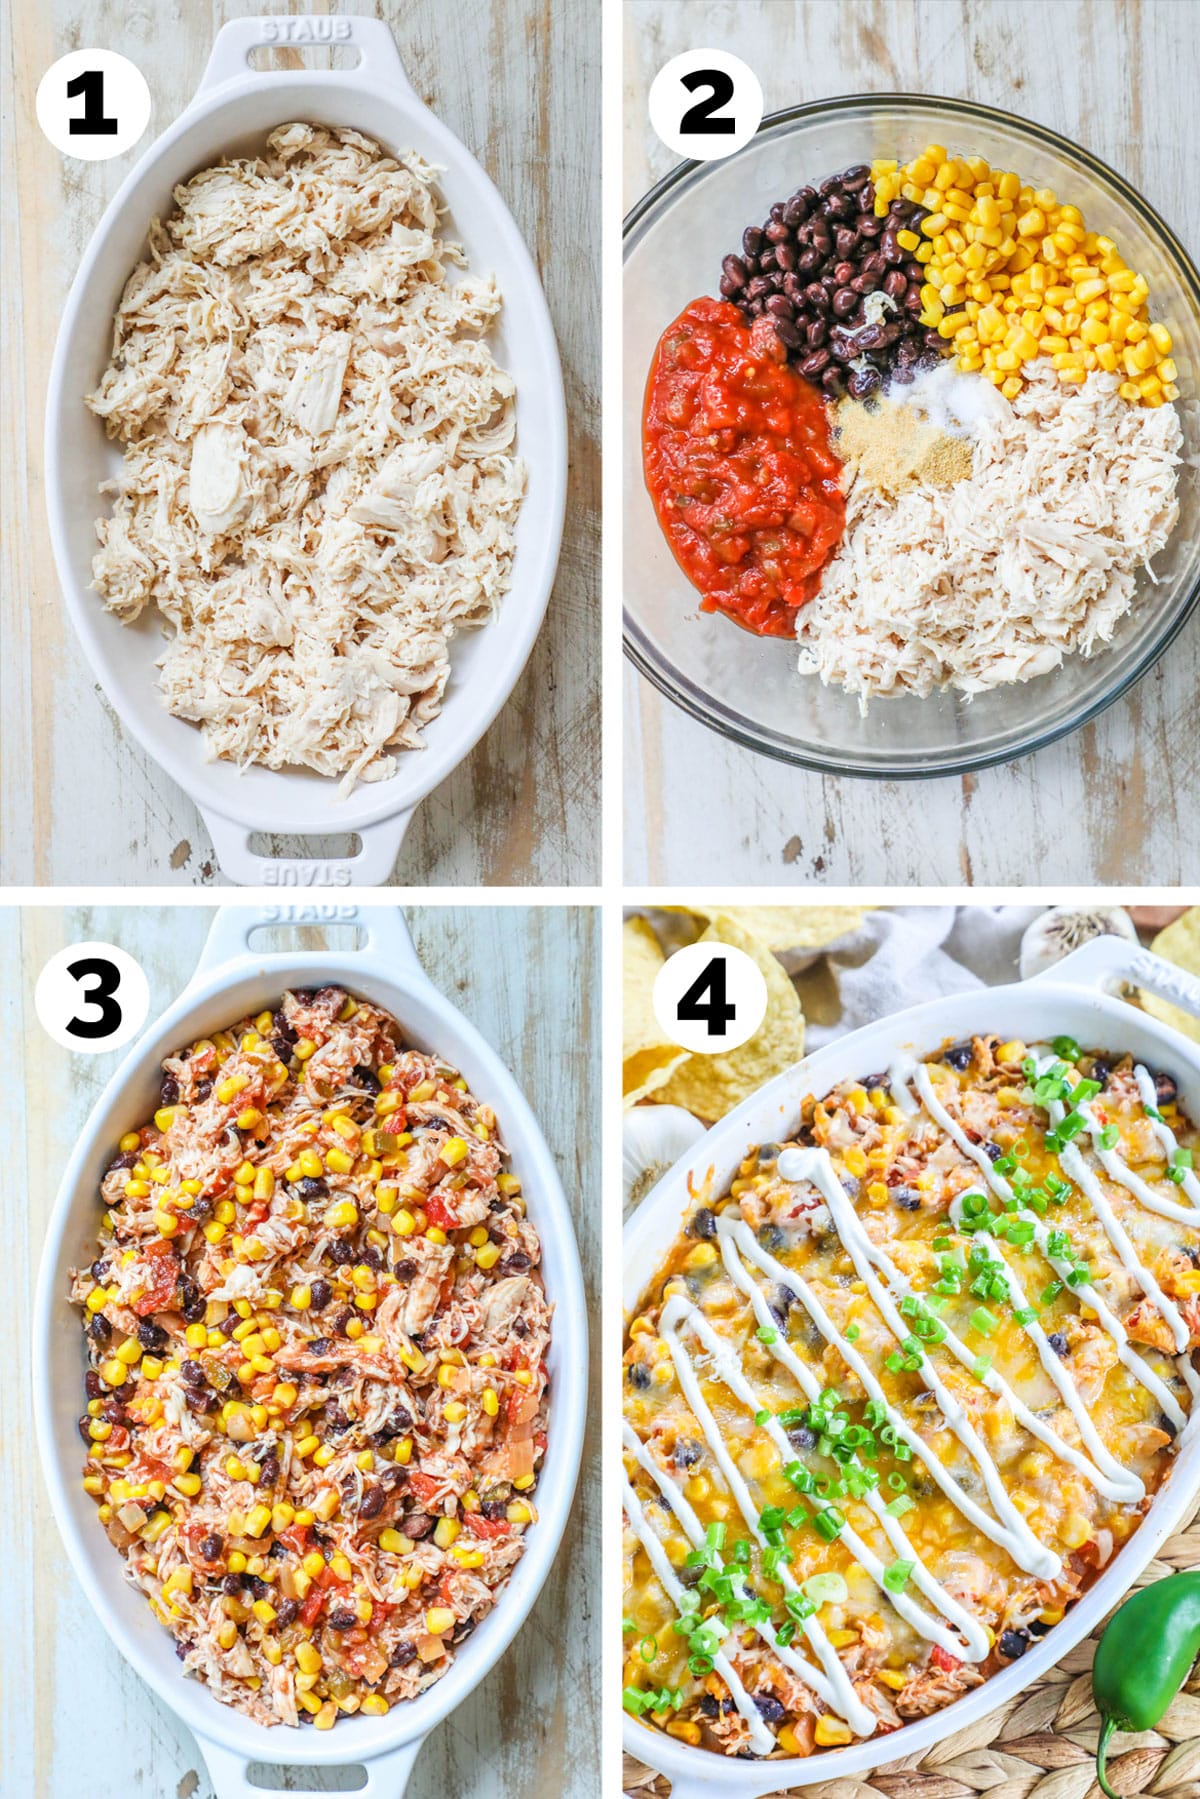 step by step photos for how to make Mexican shredded chicken casserole - 1. Add shredded chicken to casserole dish. 2. combine with salsa, beans, corn, and seasoning. 3. Spread back in the casserole dish. 4. Bake the chicken casserole in the oven and garnish with sour cream and cilantro.